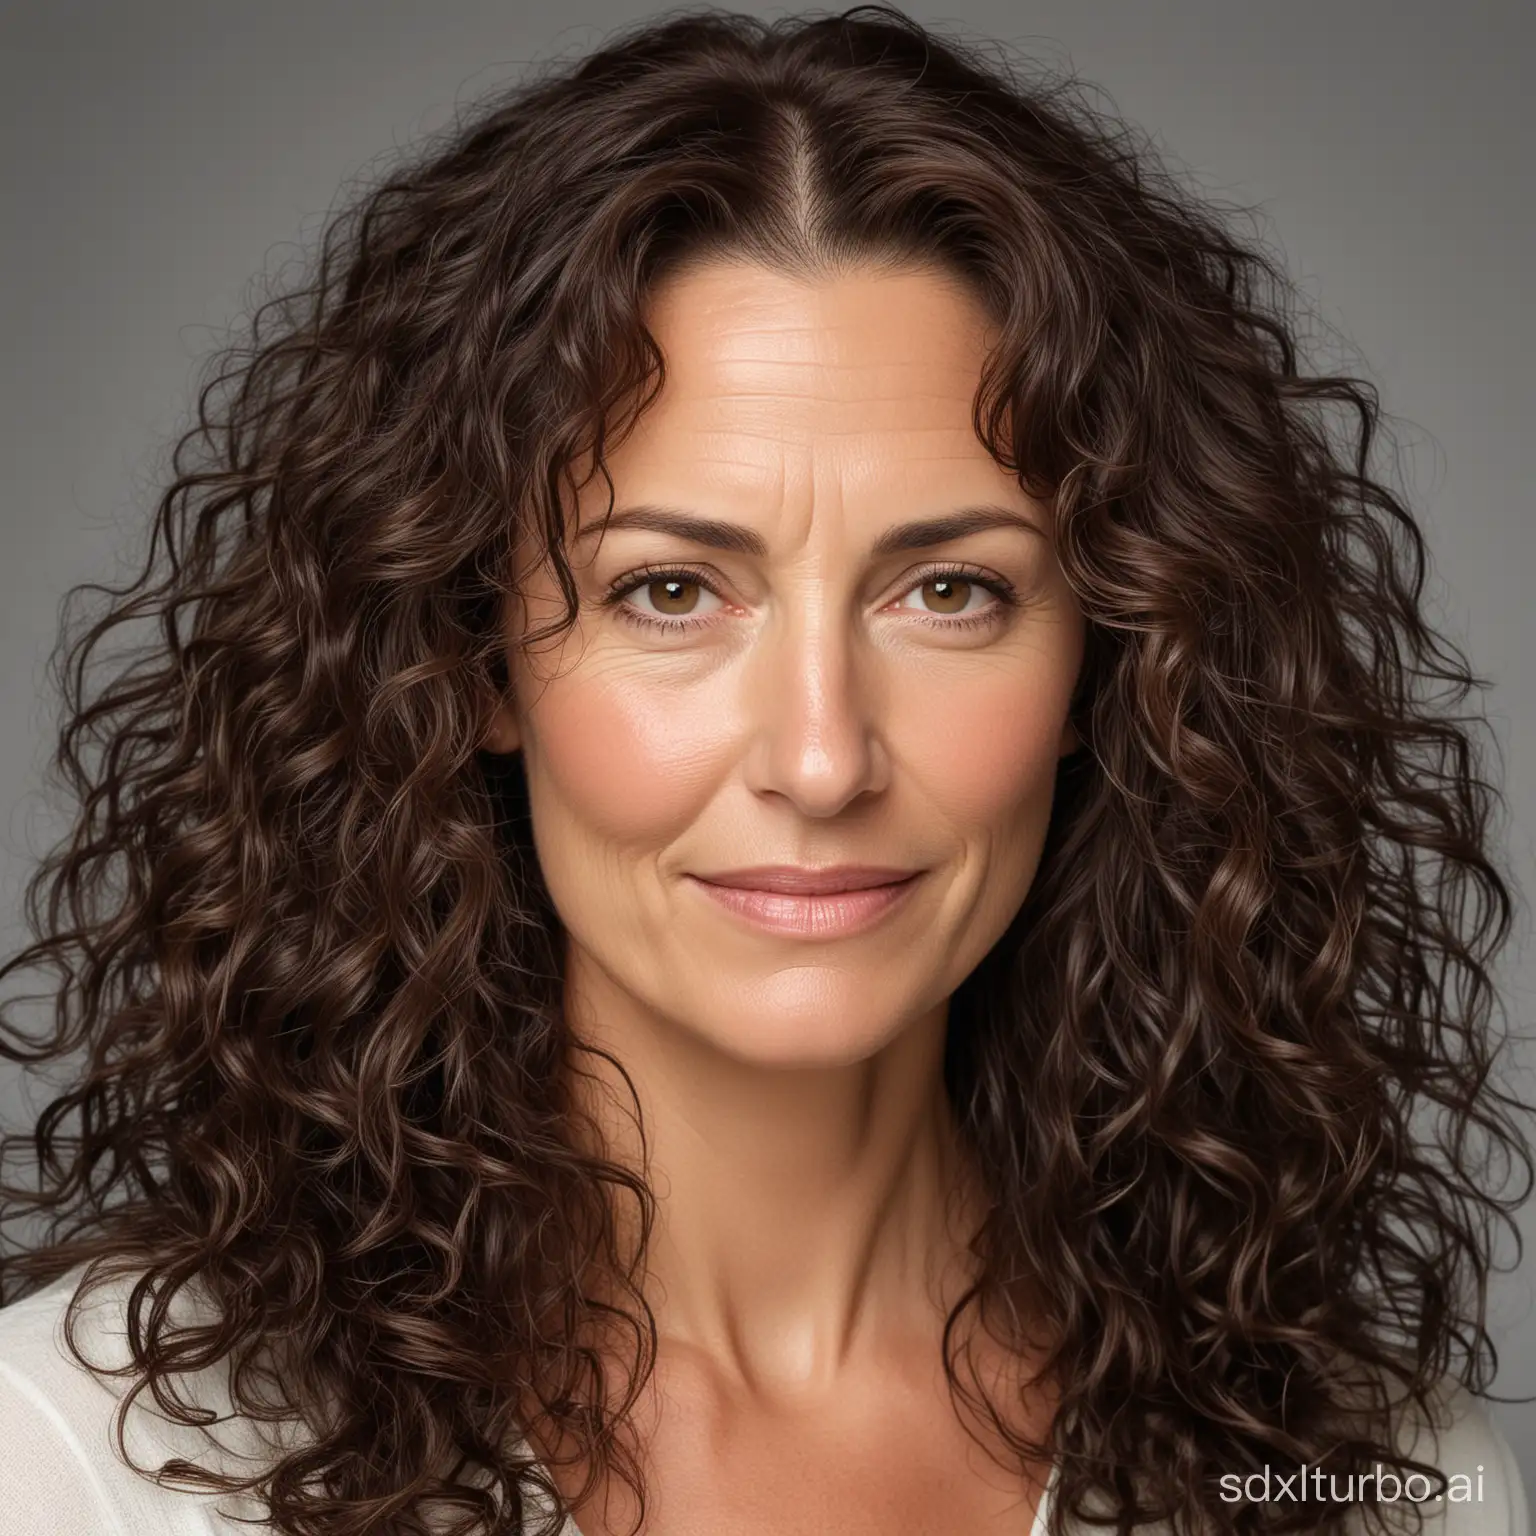 A woman around 50 years old with very long, curly, dark brown hair, with wrinkles on her face, and finally resembling Andi MacDowell.